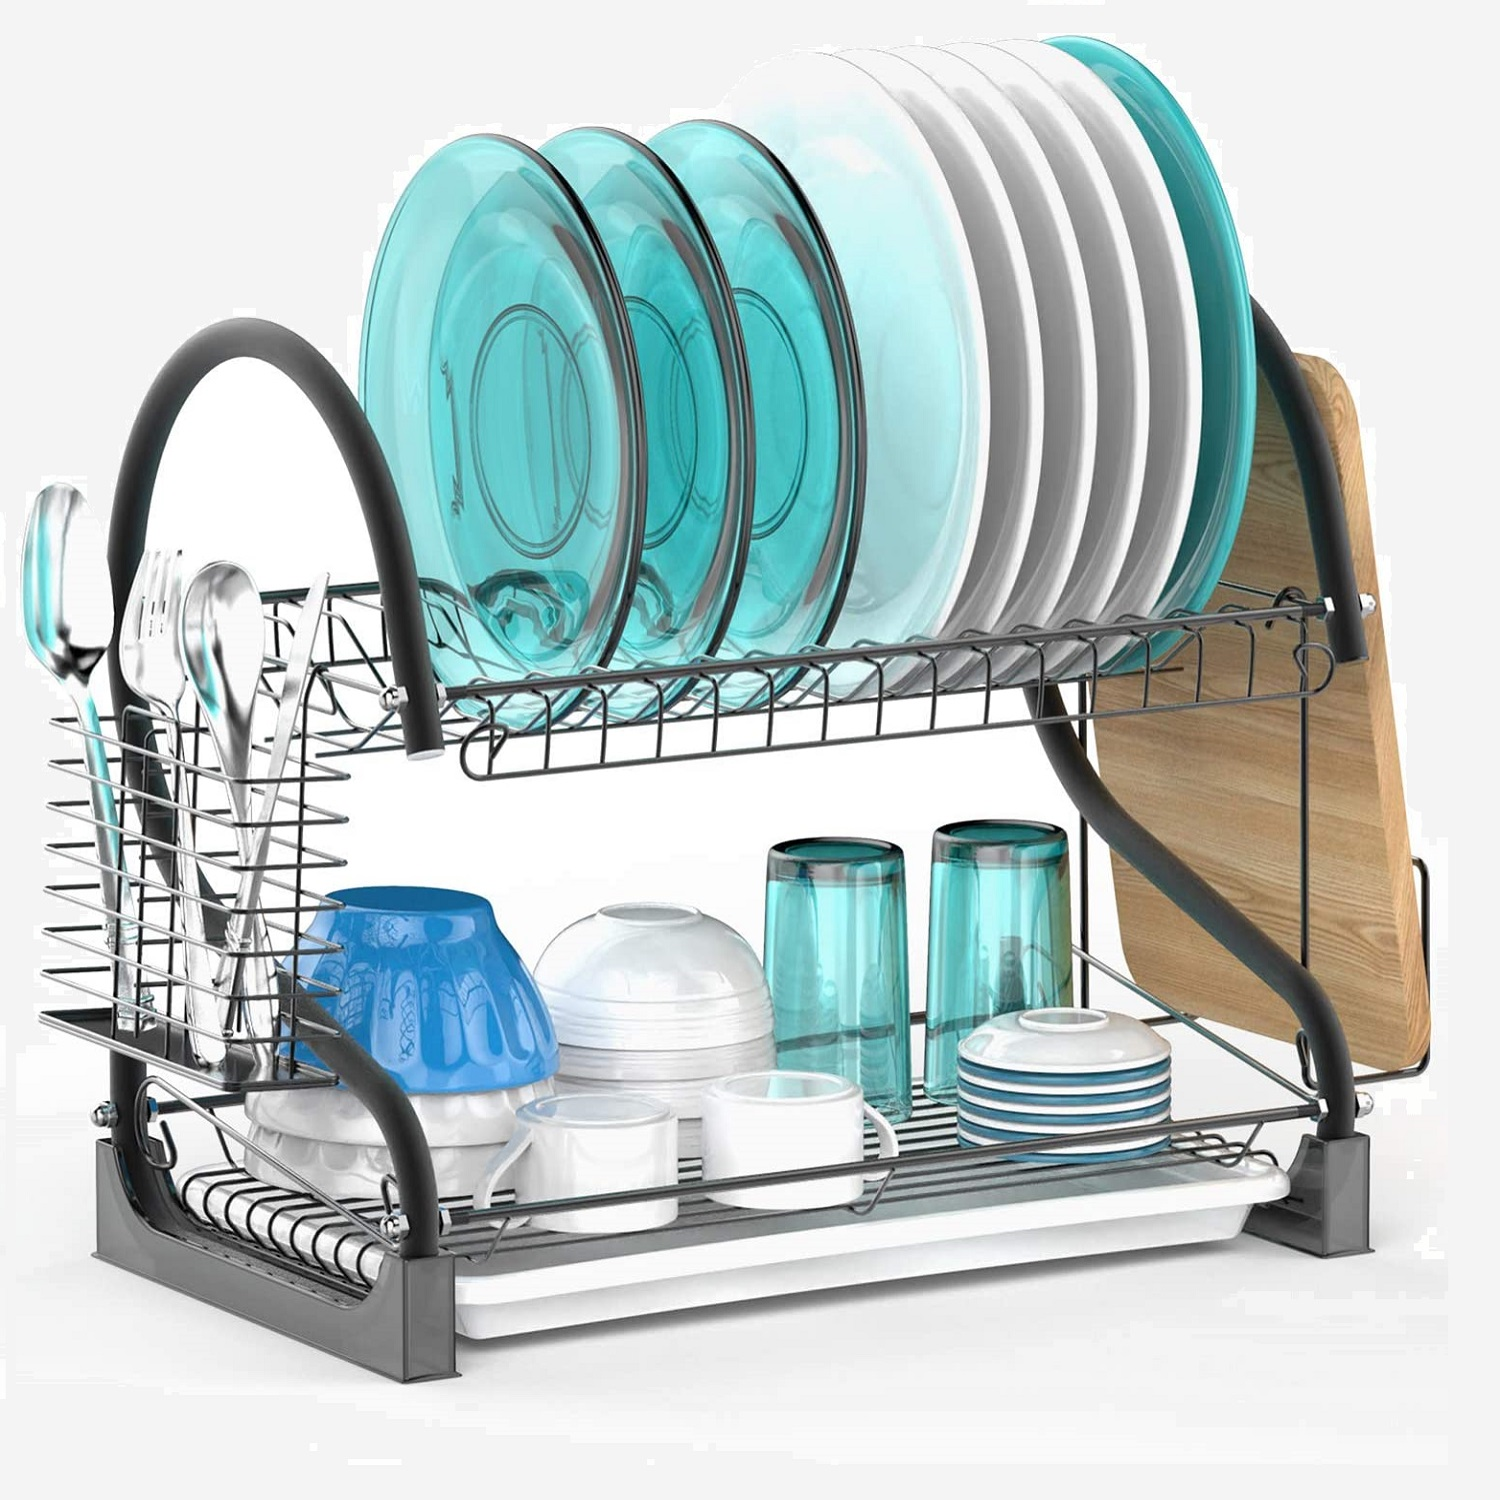 https://www.ekrhome.com/dish-drying-rack-2-tier-dish-rack-with-removable-drain-board-dish-drainer-utensil-holder-cutting-board-holder-for-kitchen-countertop-black-product/